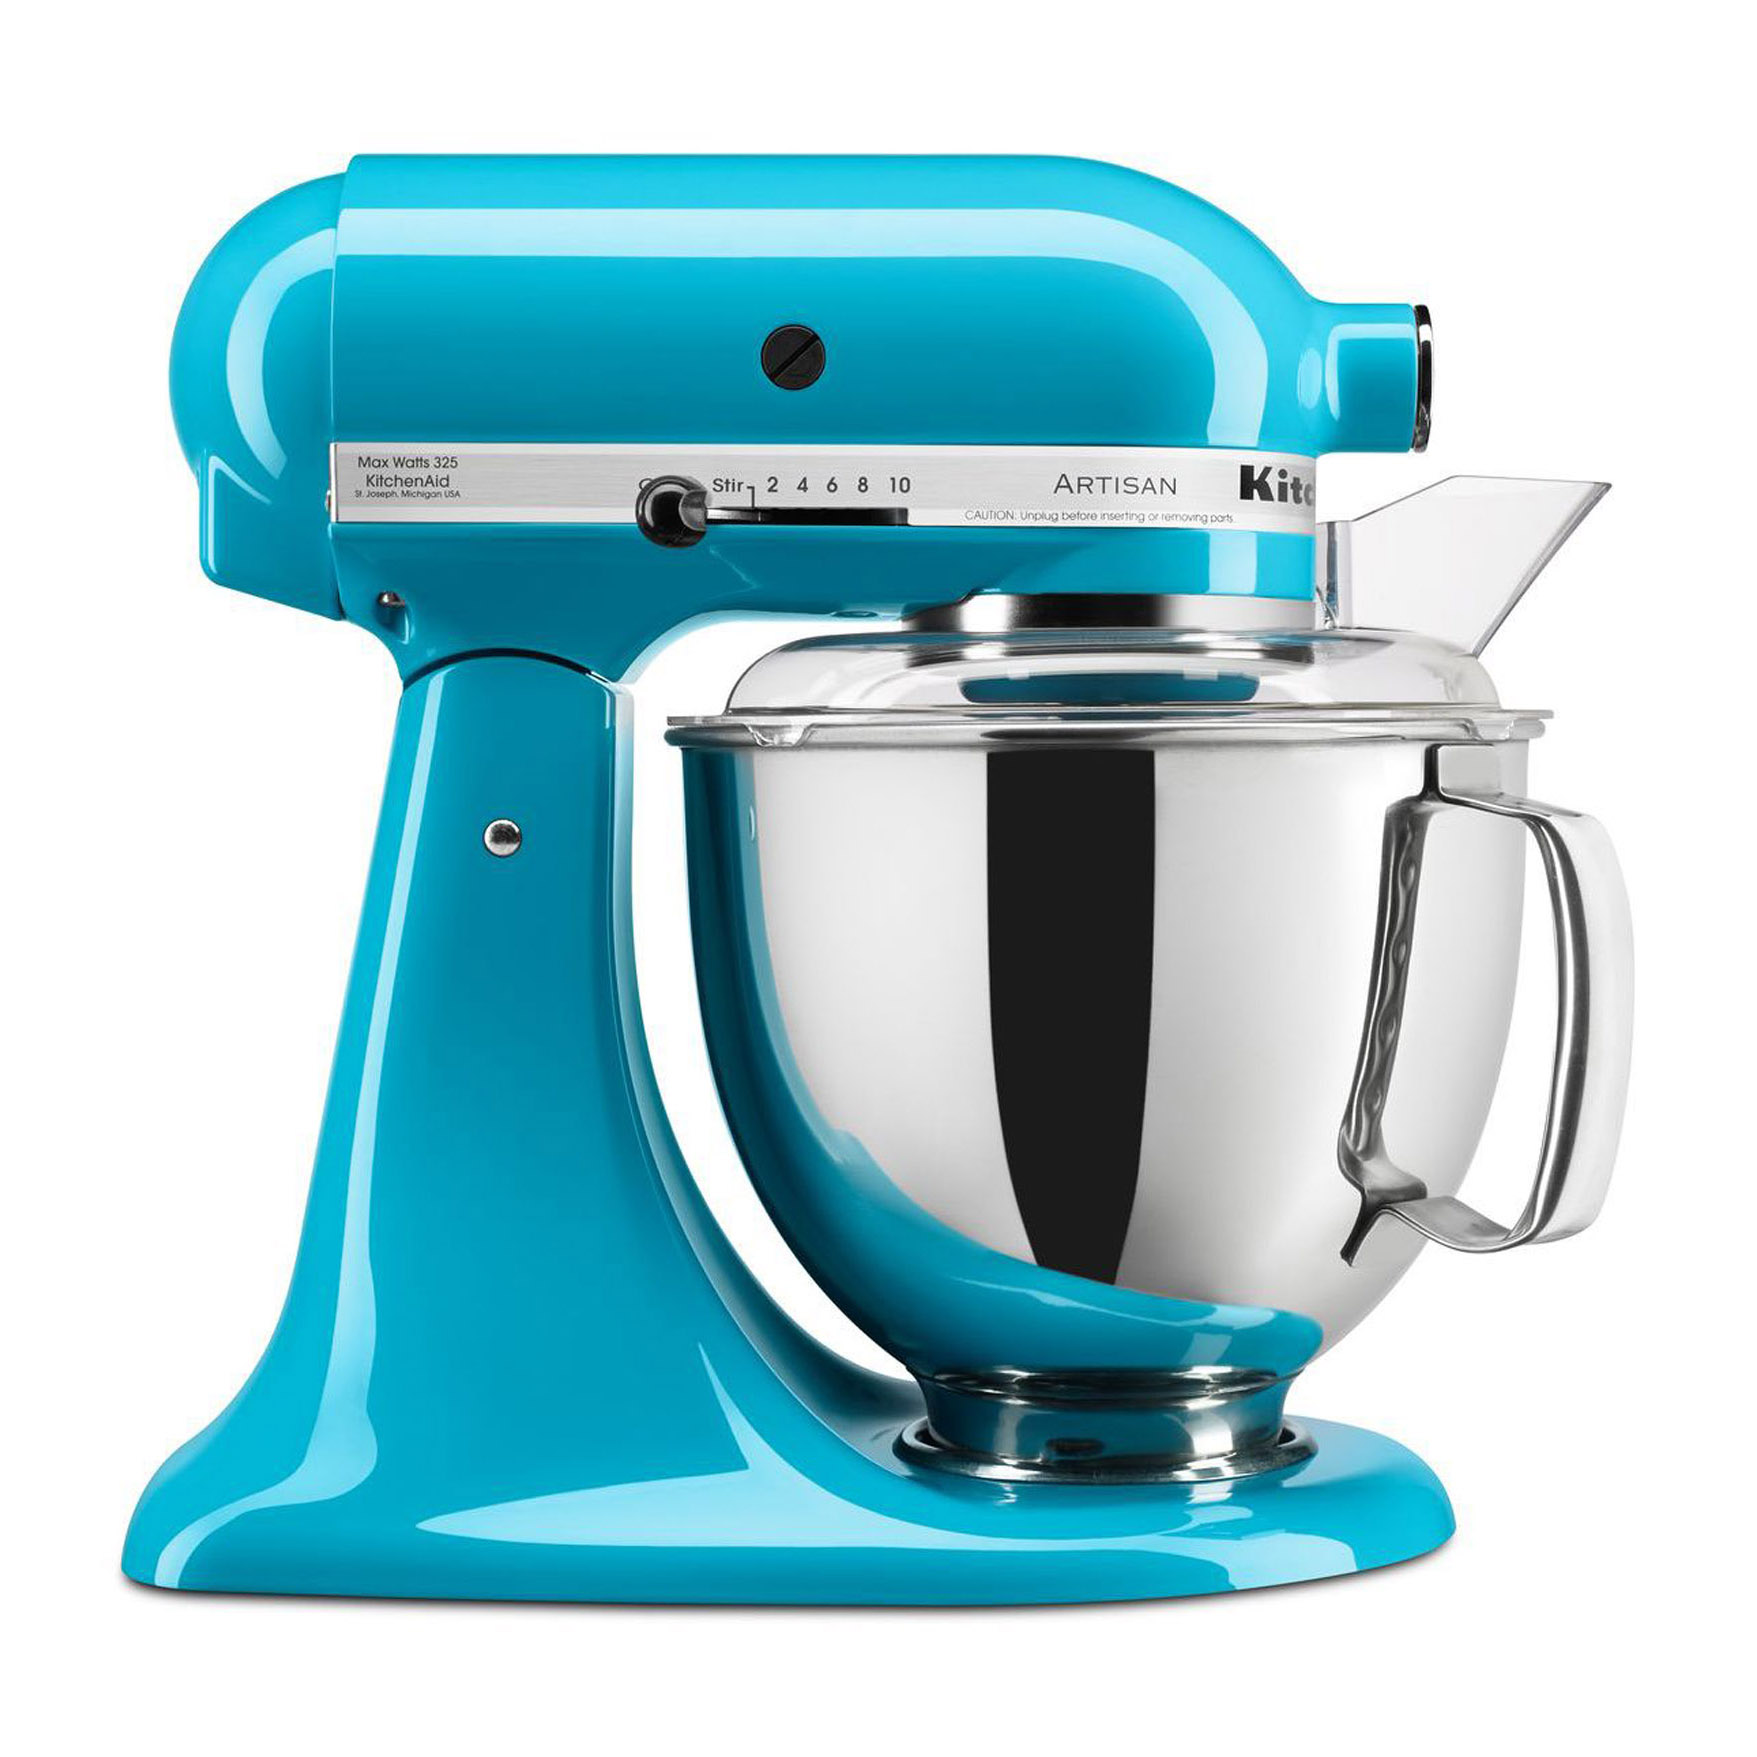 mixer kitchenaid stand artisan kitchen blue appliances aid colorful mixers quart food crystal series history cooks bakers ultimate gift guide